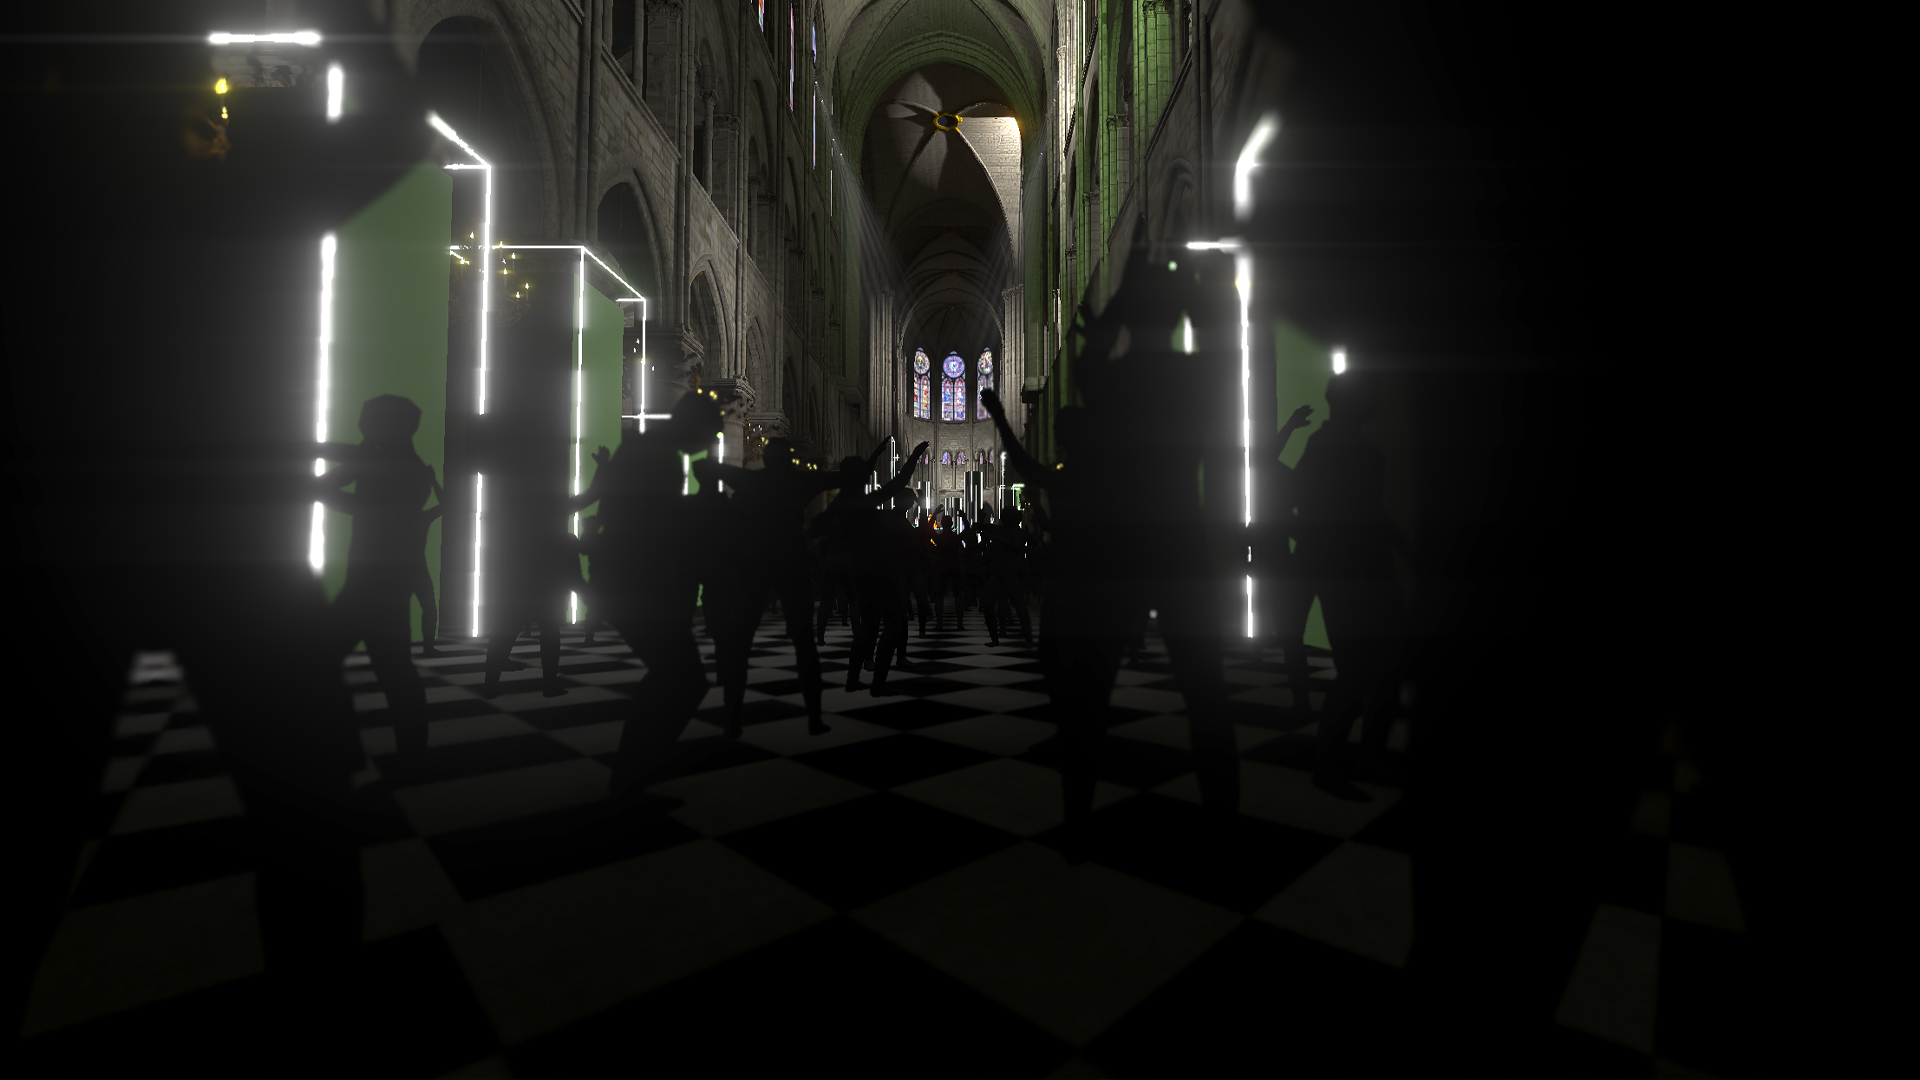 Image of virtual dancers inside the "Welcome to the Other Side" concern inside Notre Dame